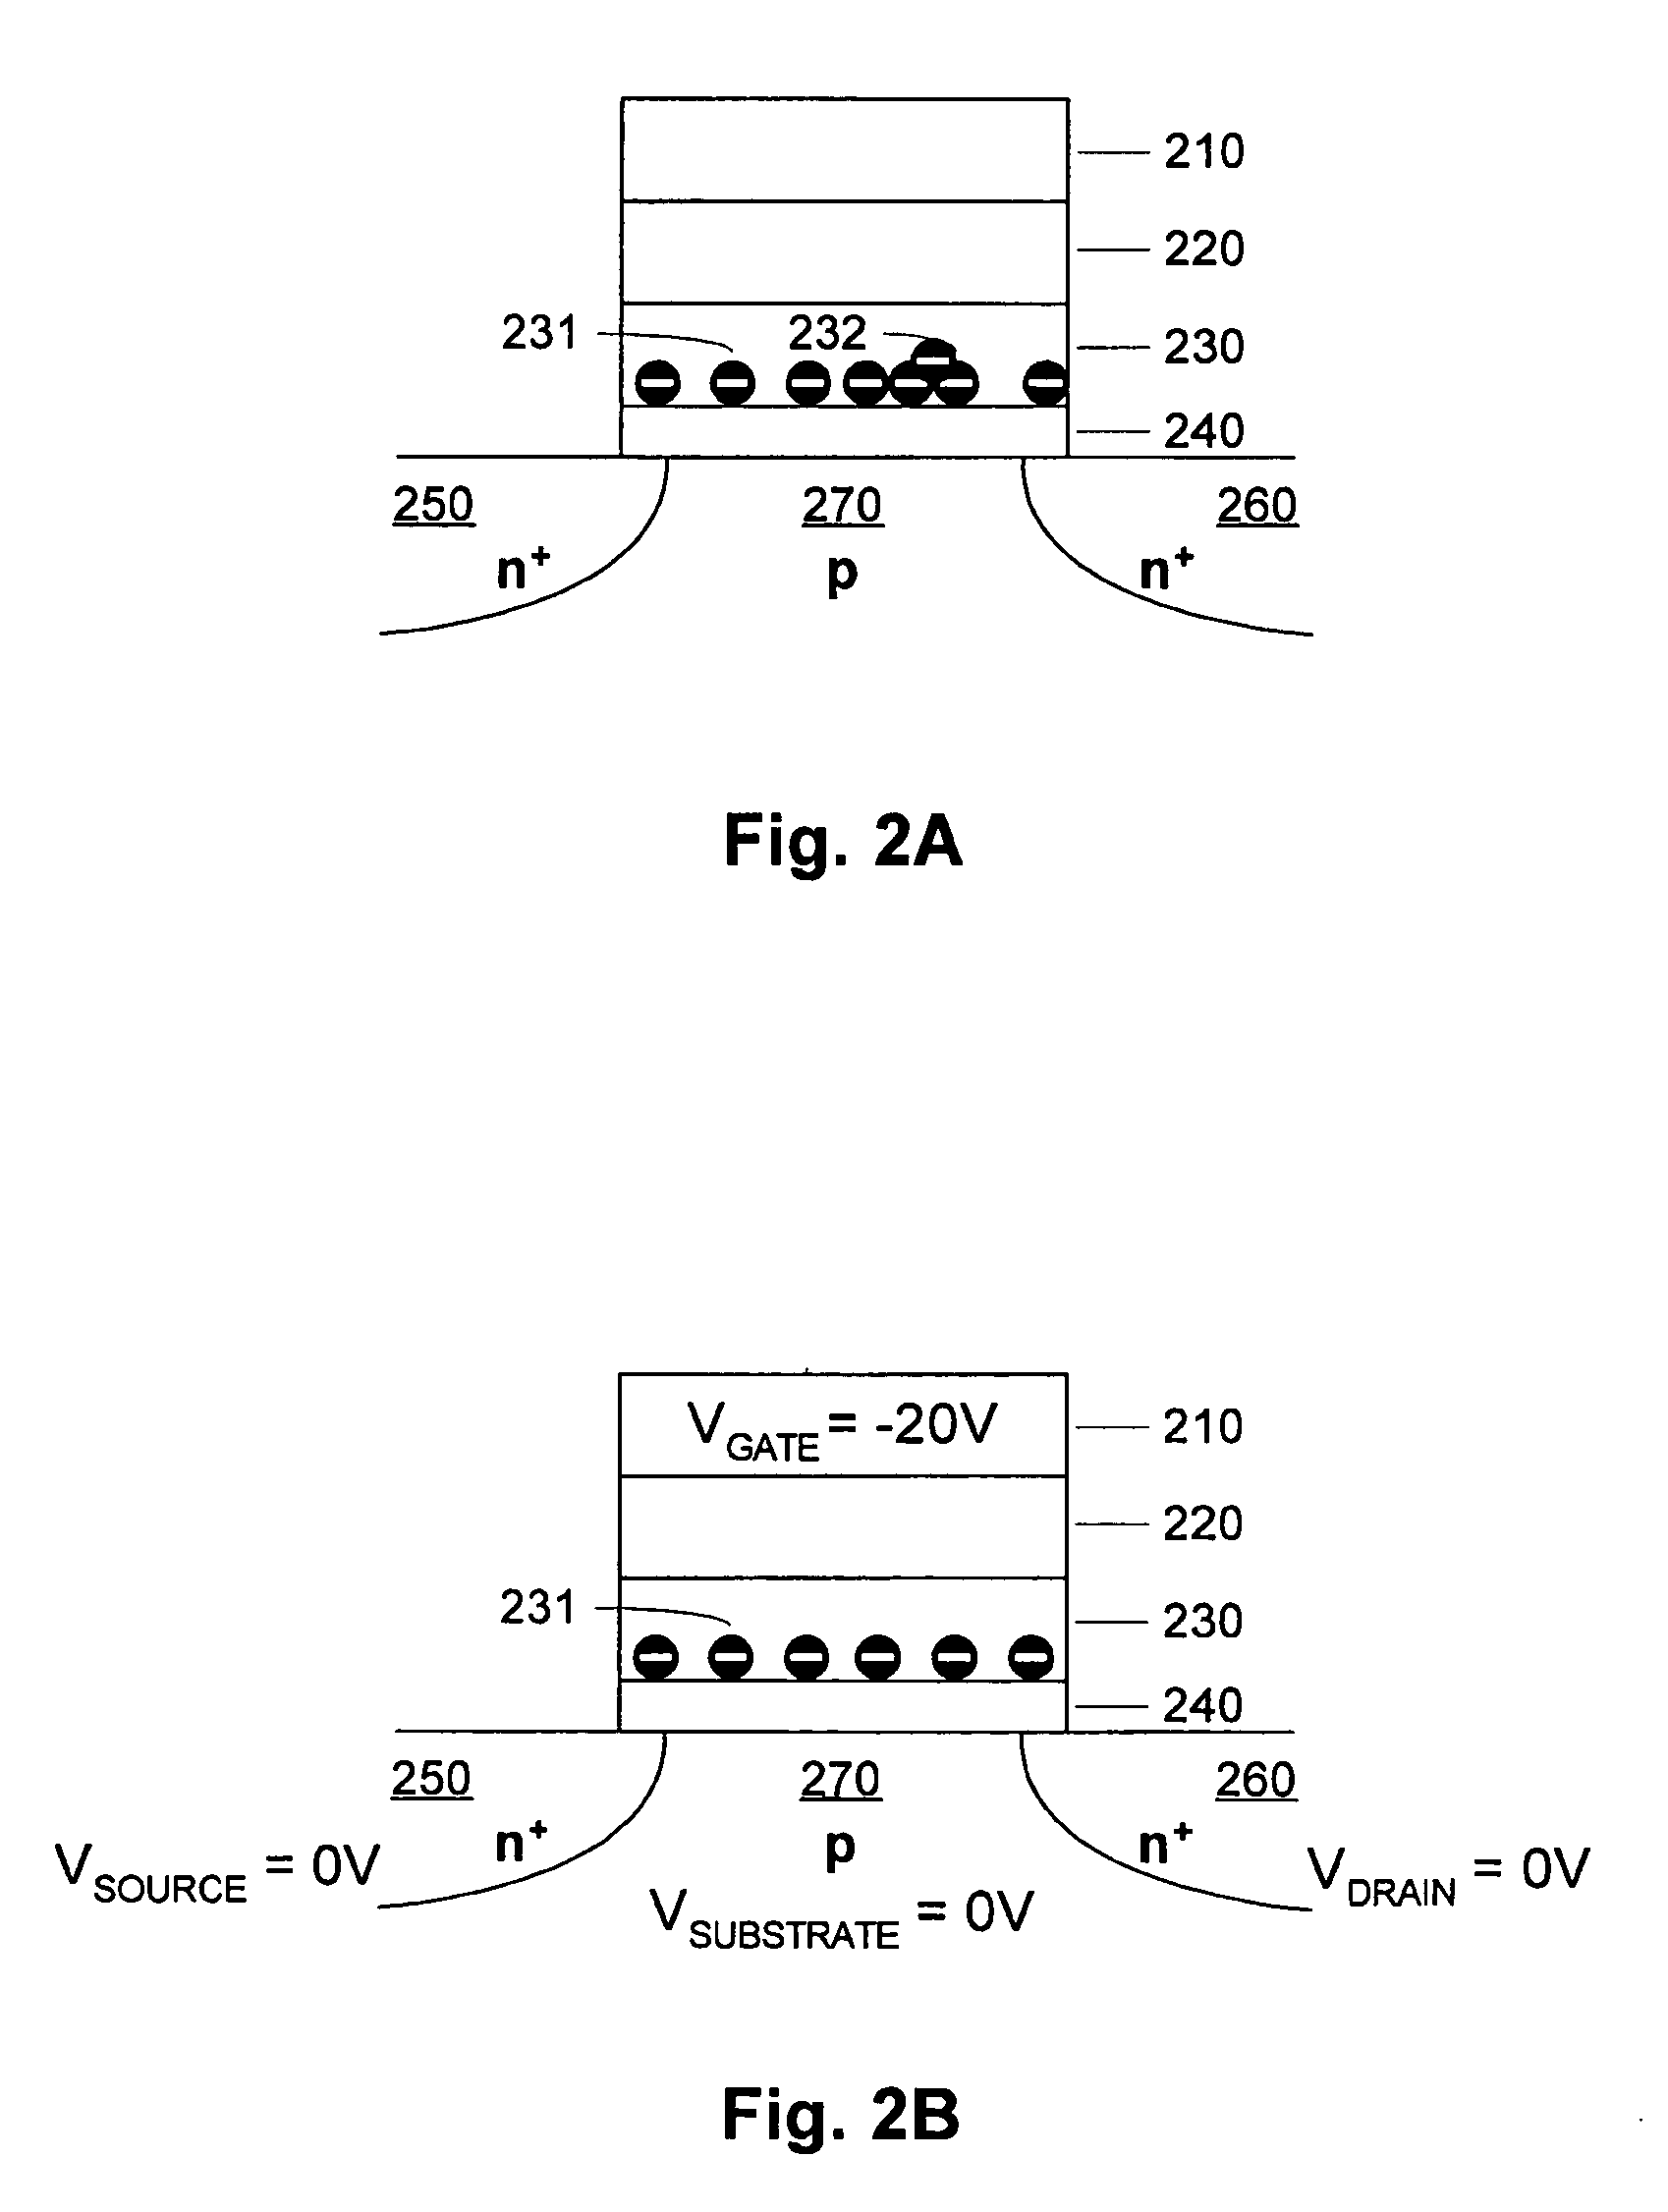 Operation scheme with charge balancing erase for charge trapping non-volatile memory